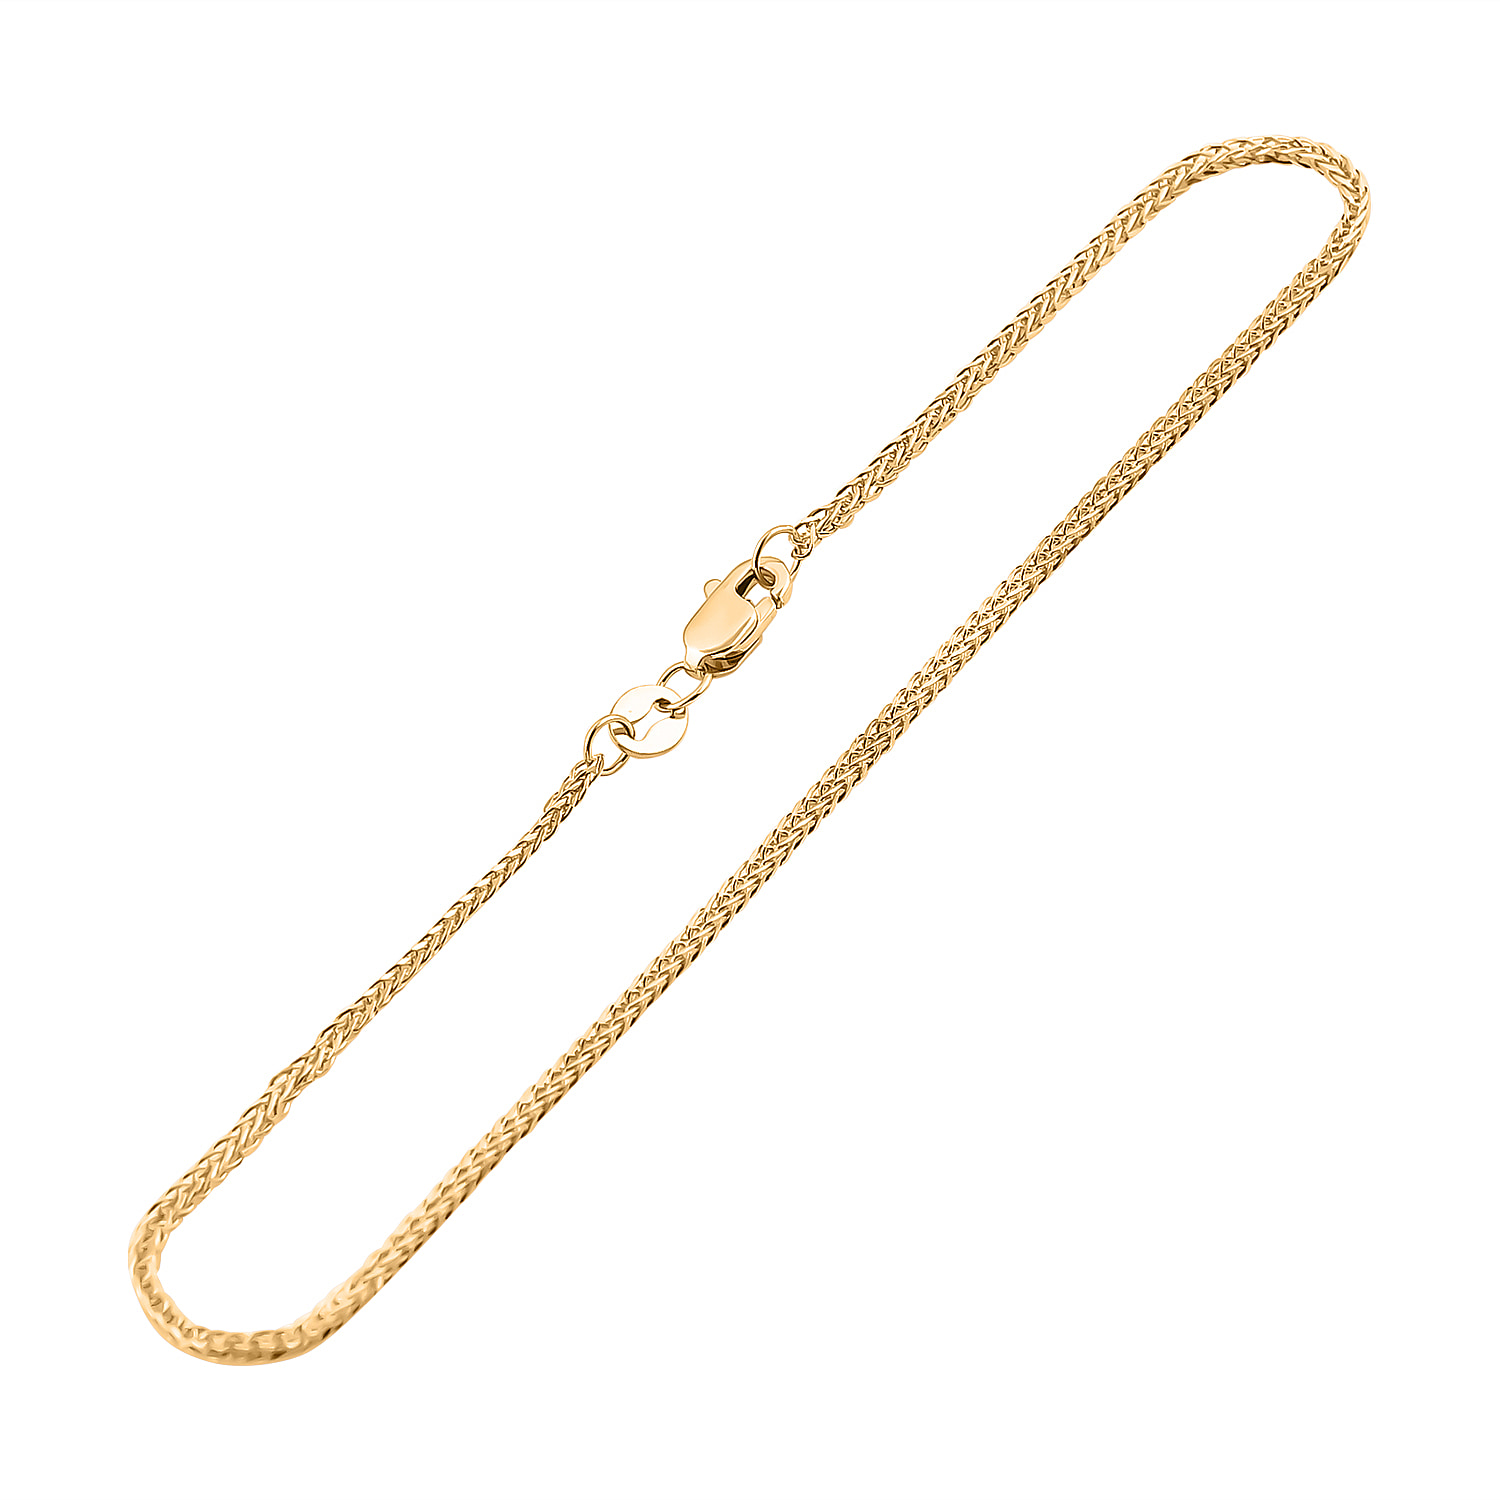 One Time Closeout - 9K Yellow Gold SPIGA Bracelet (Size - 7.5)